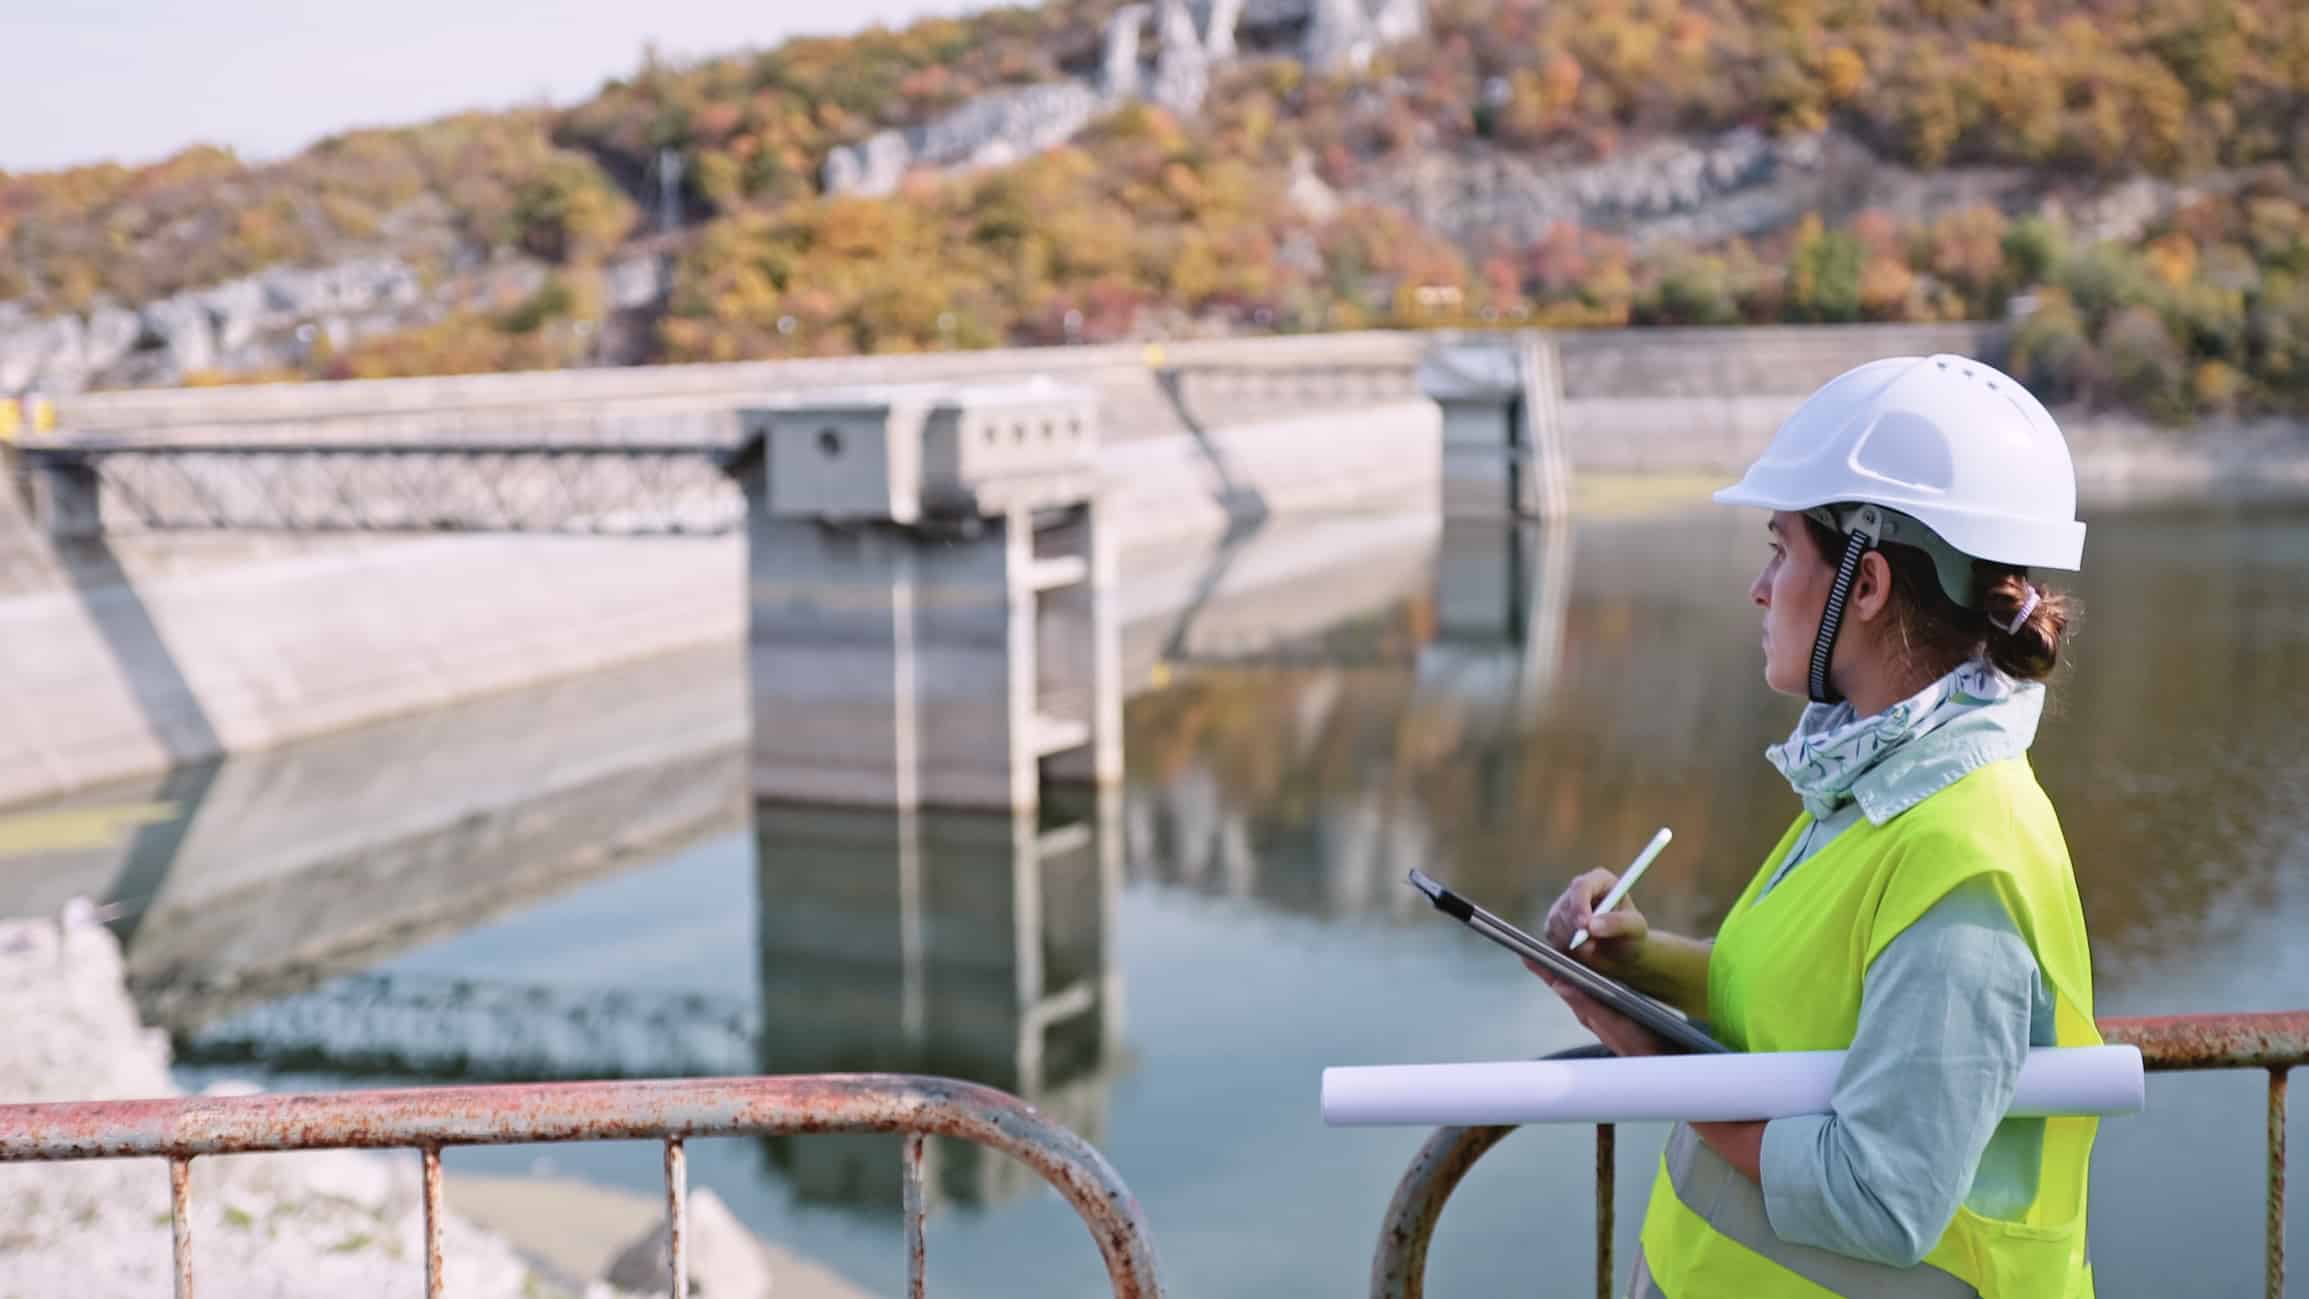 An engineer works at a hydroelectric power station, which creates renewable energy.